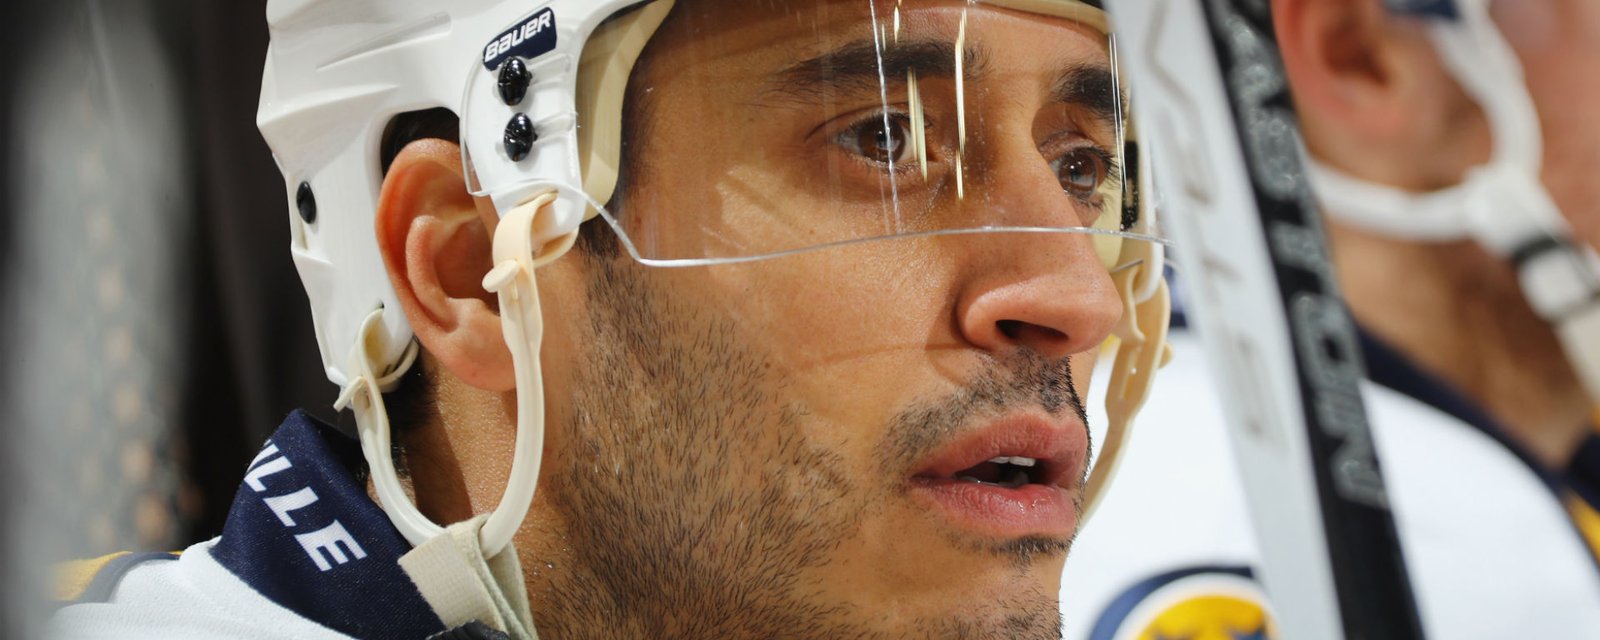 Mike Ribeiro looks awful in latest interview, stays mum on what happened 